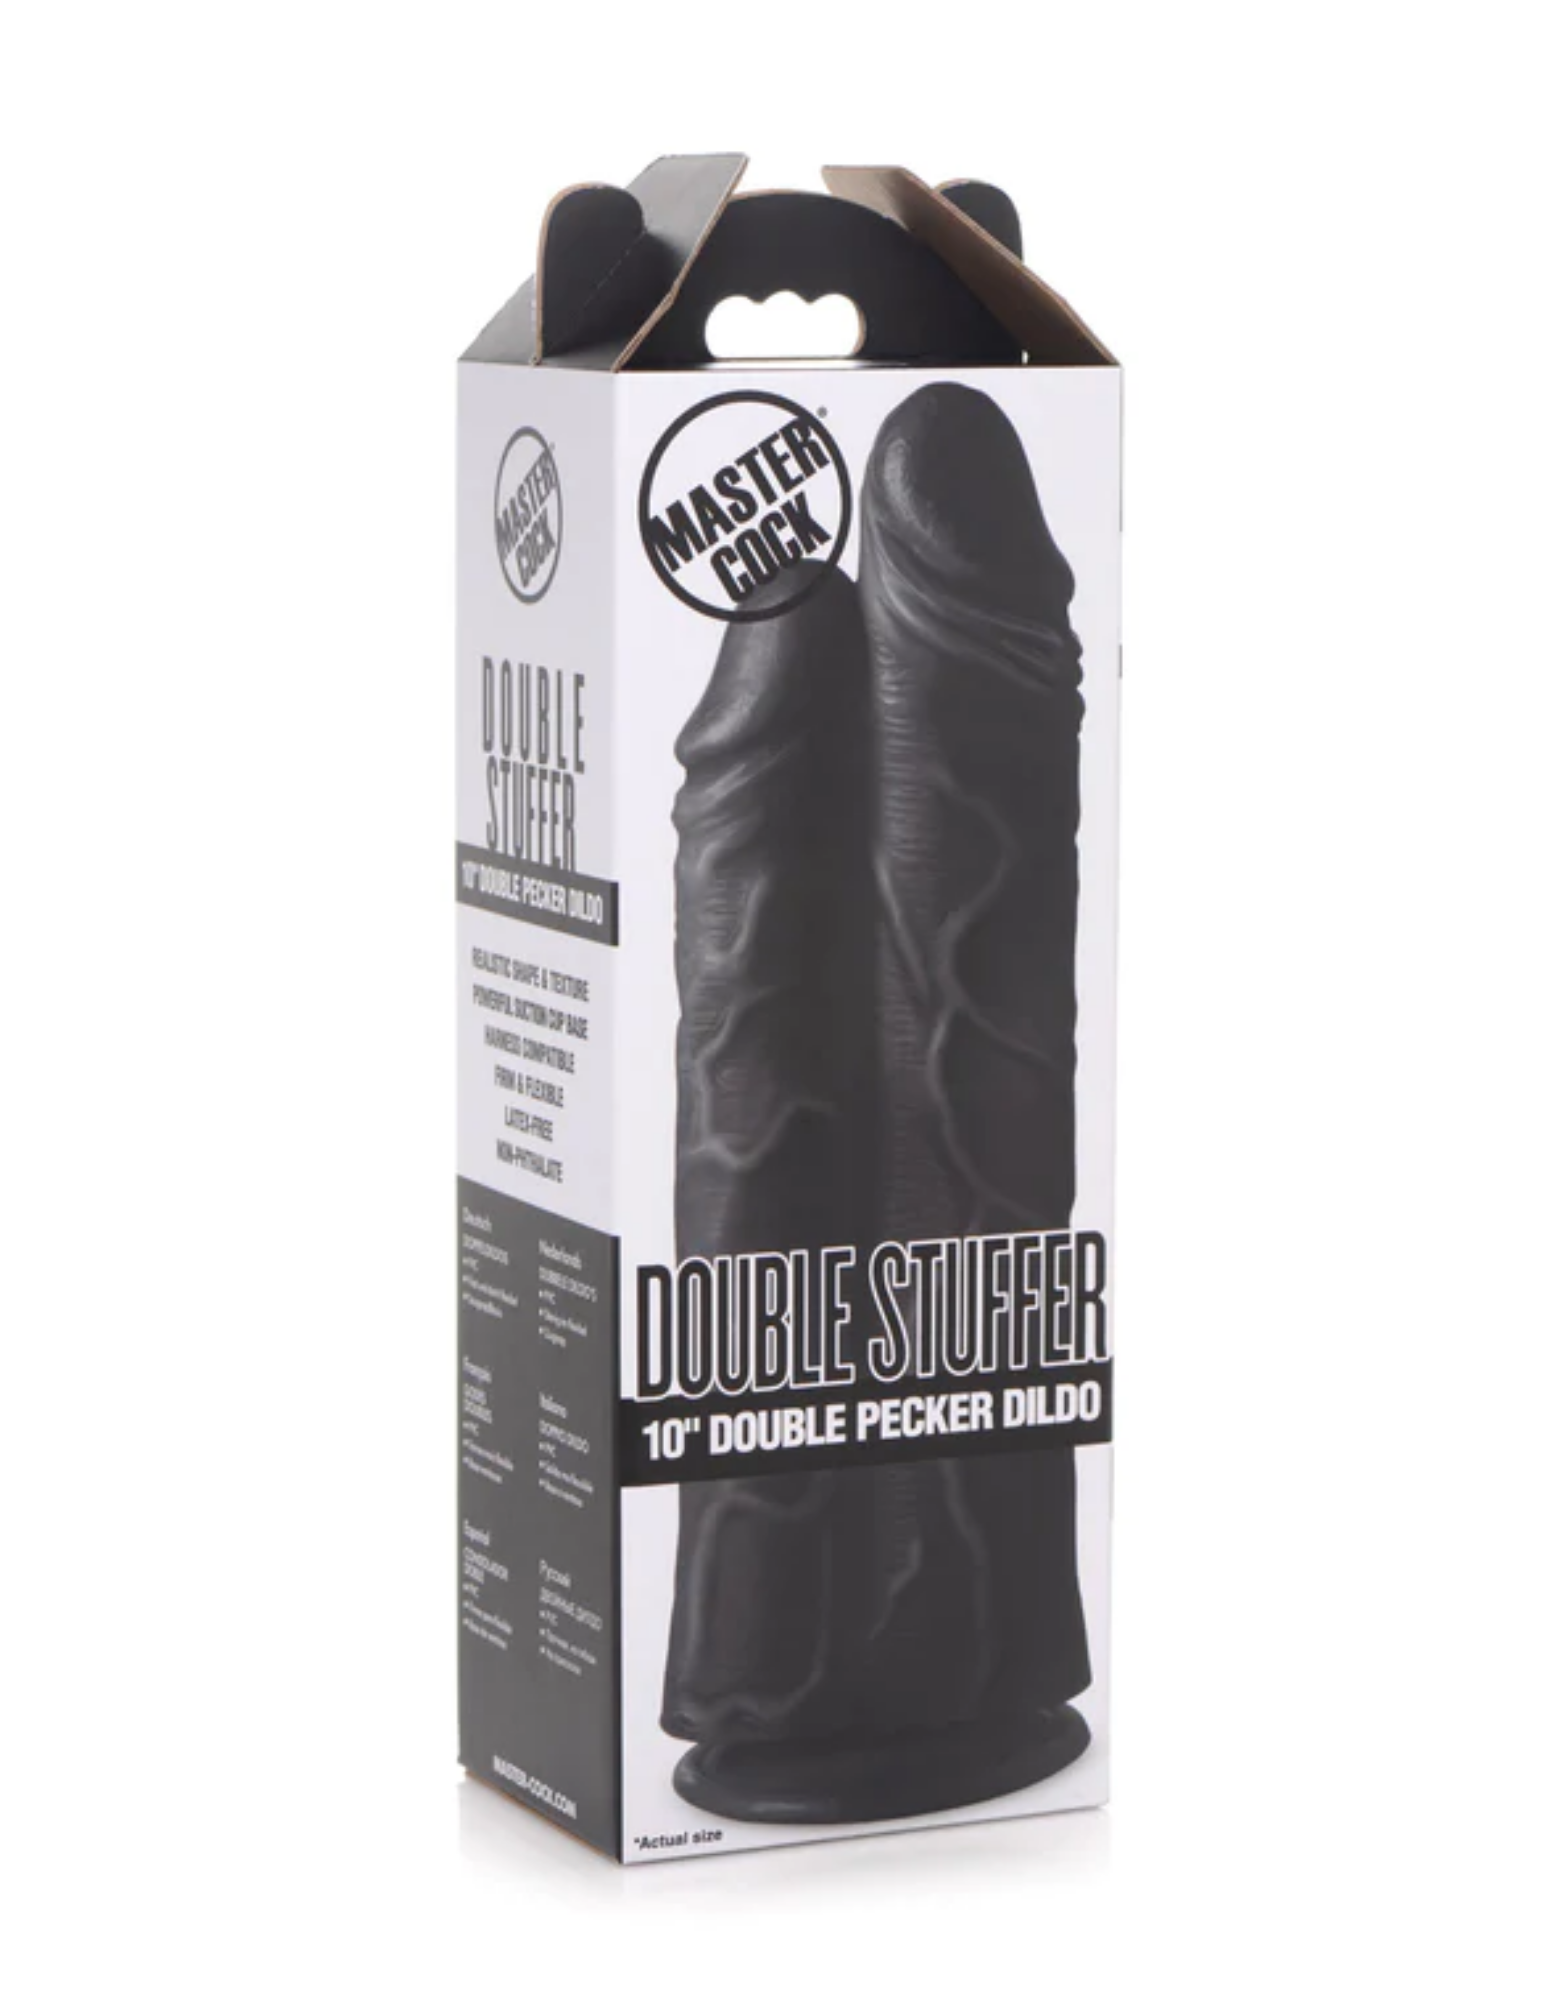 Master Cock Double Stuffer (black) in package.